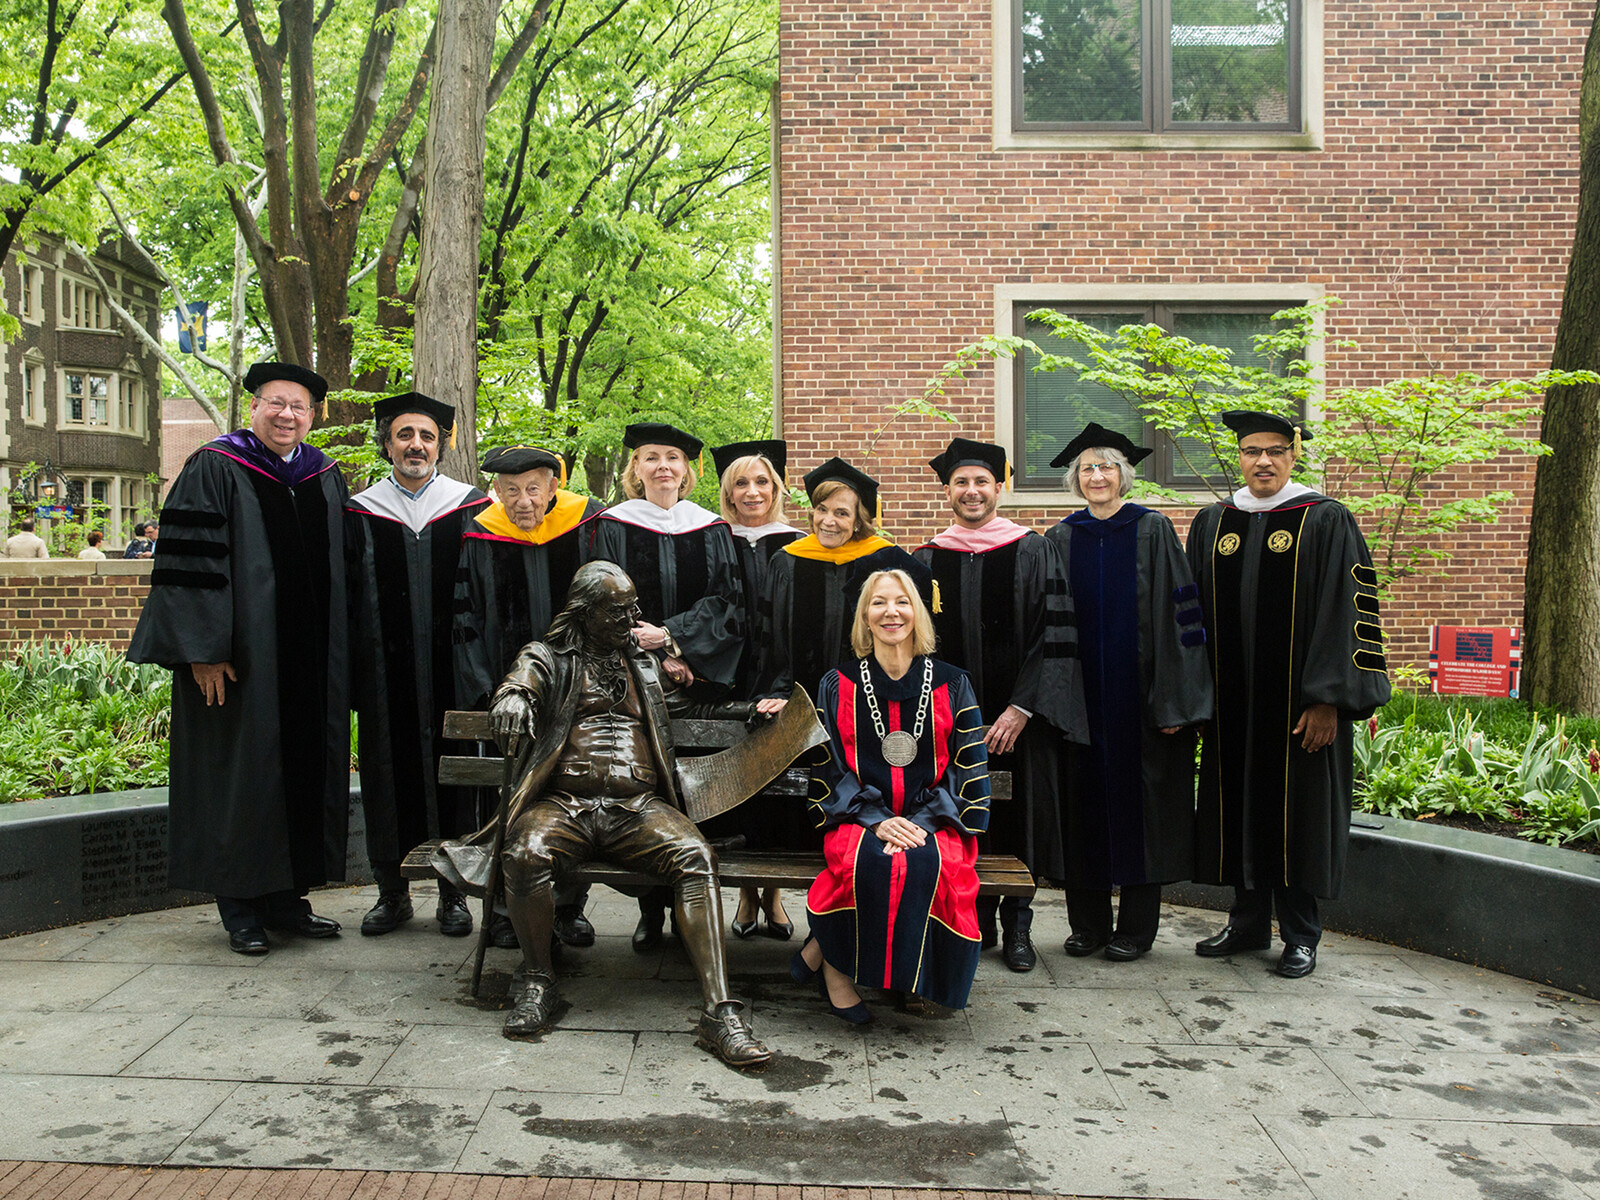 2018 Penn, Amy Gutmann and honorary degree recipients in regalia